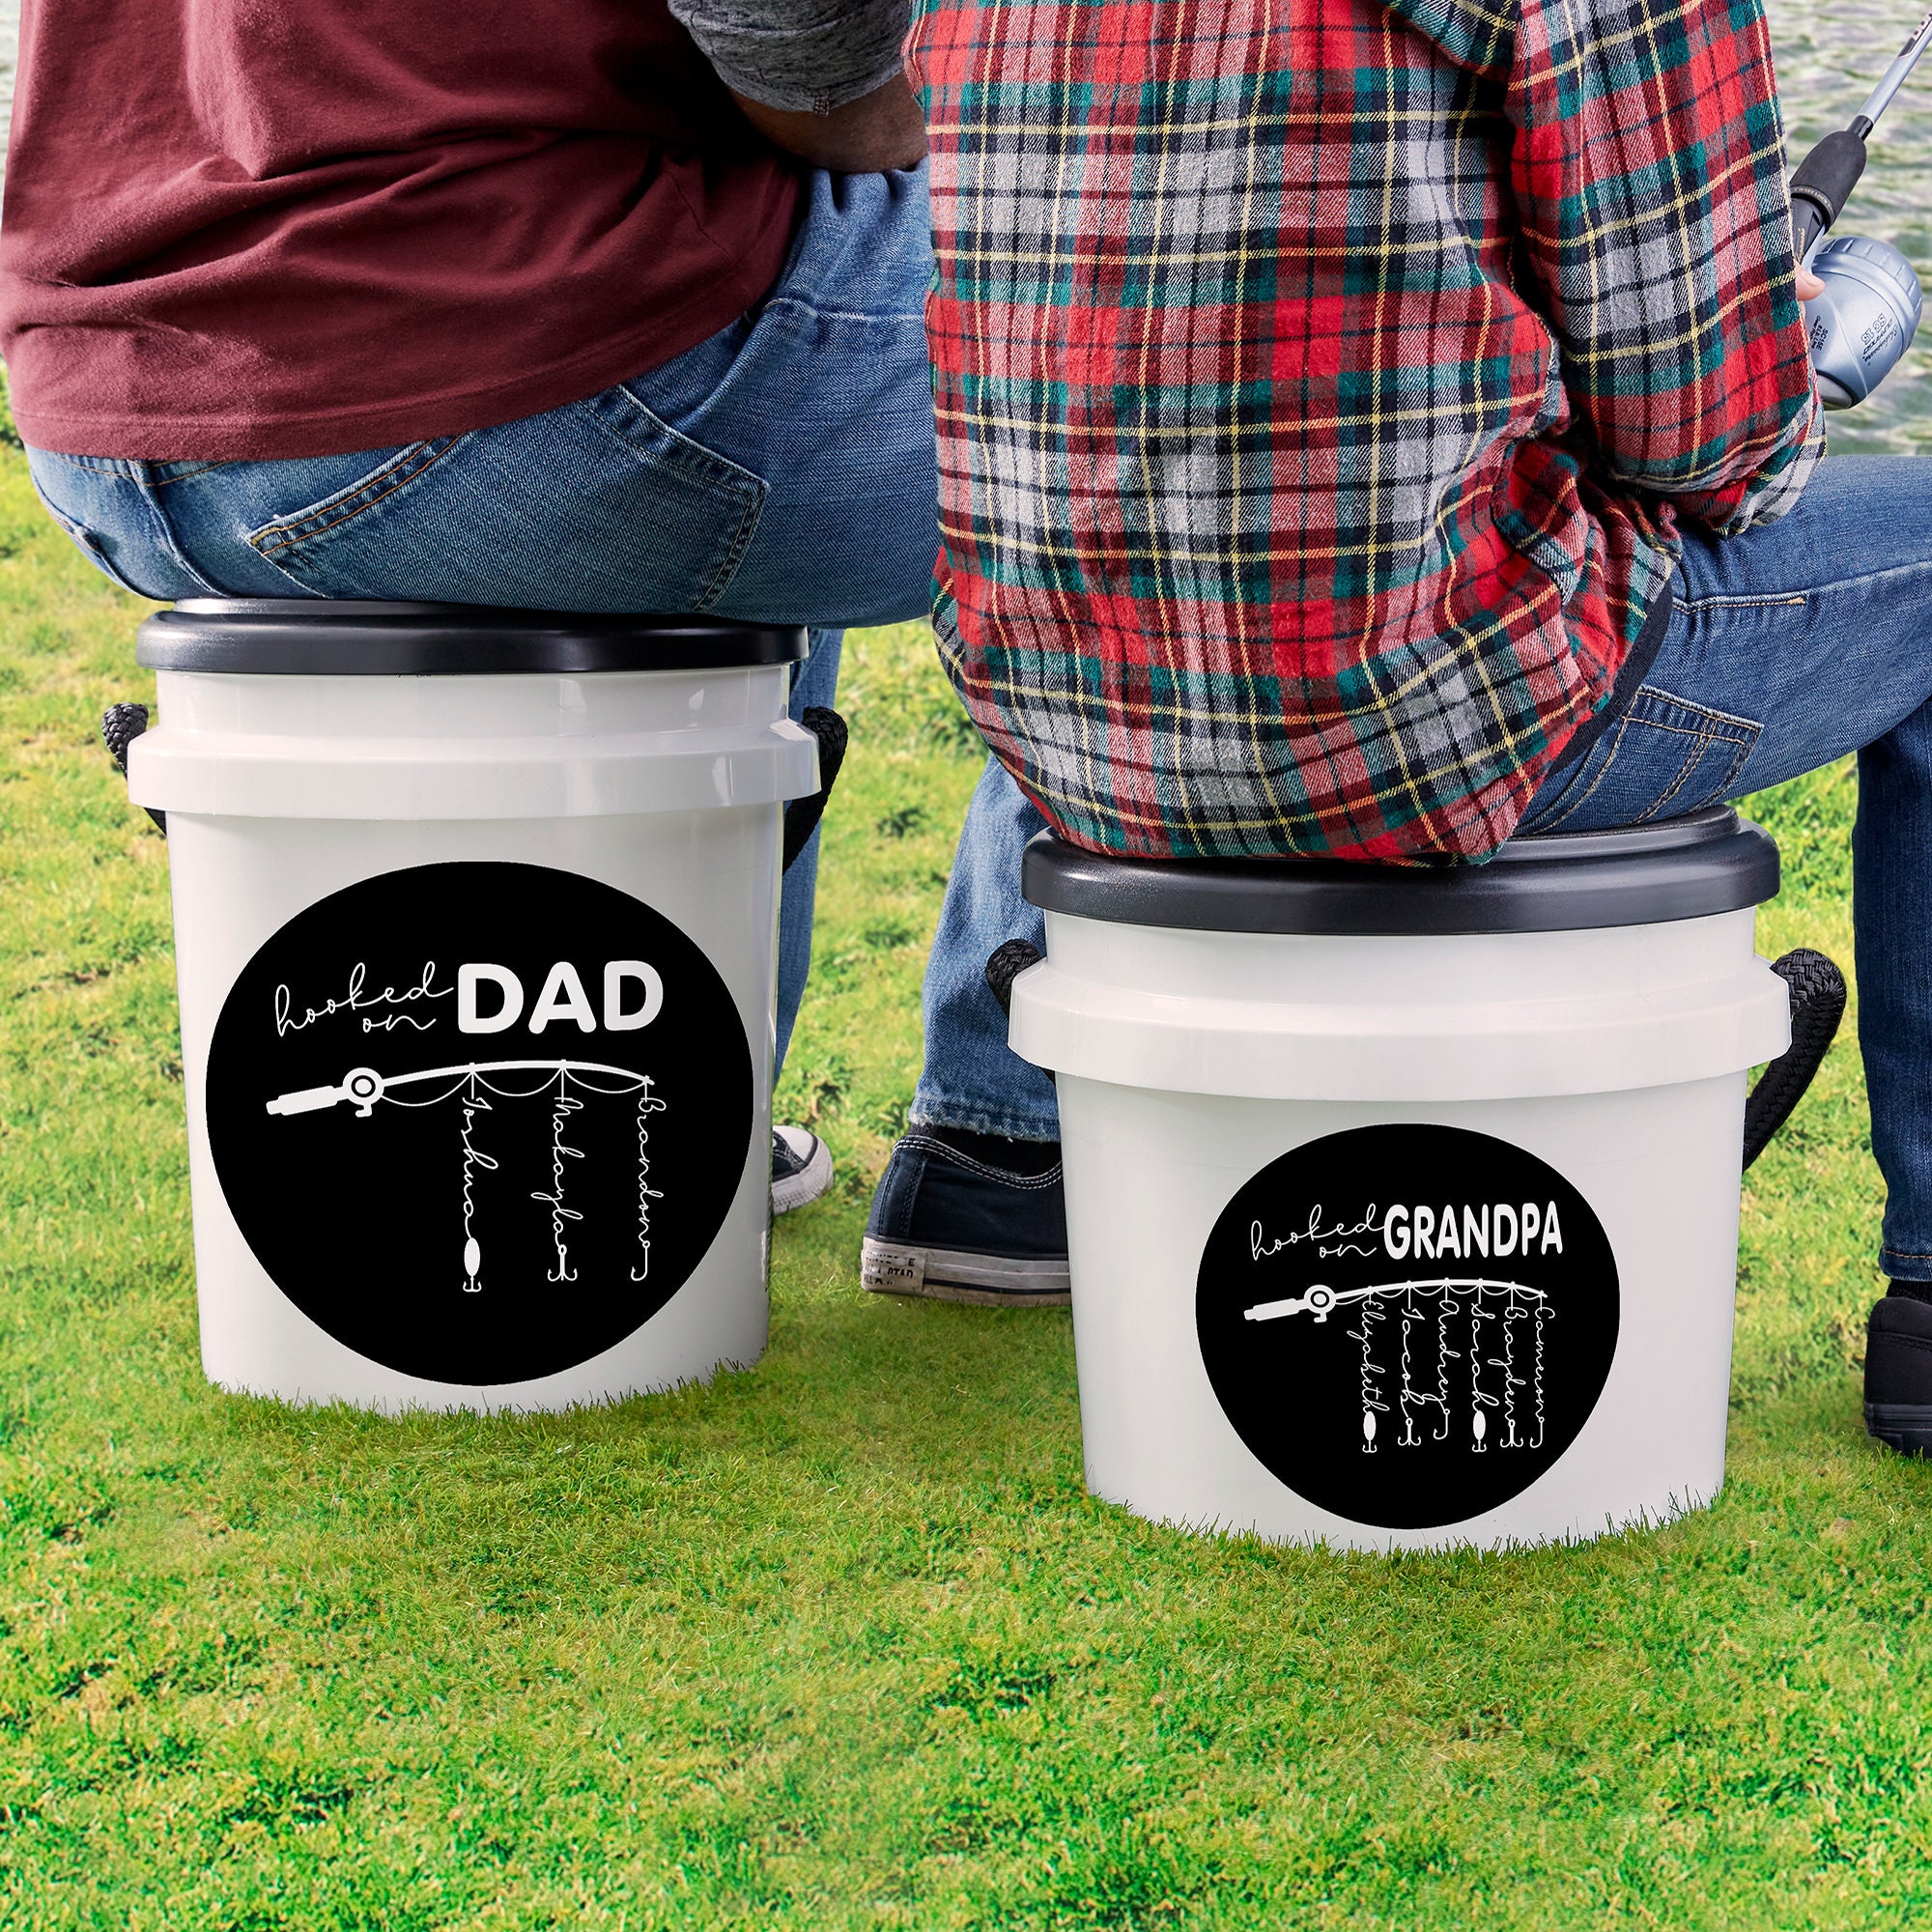 Hooked on Dad Personalized Fishing Bucket Seat, Personalized Gifts for Dad,  Fishing Gifts for Men, Fathers Day Gift, Grandpa Gifts -  Canada